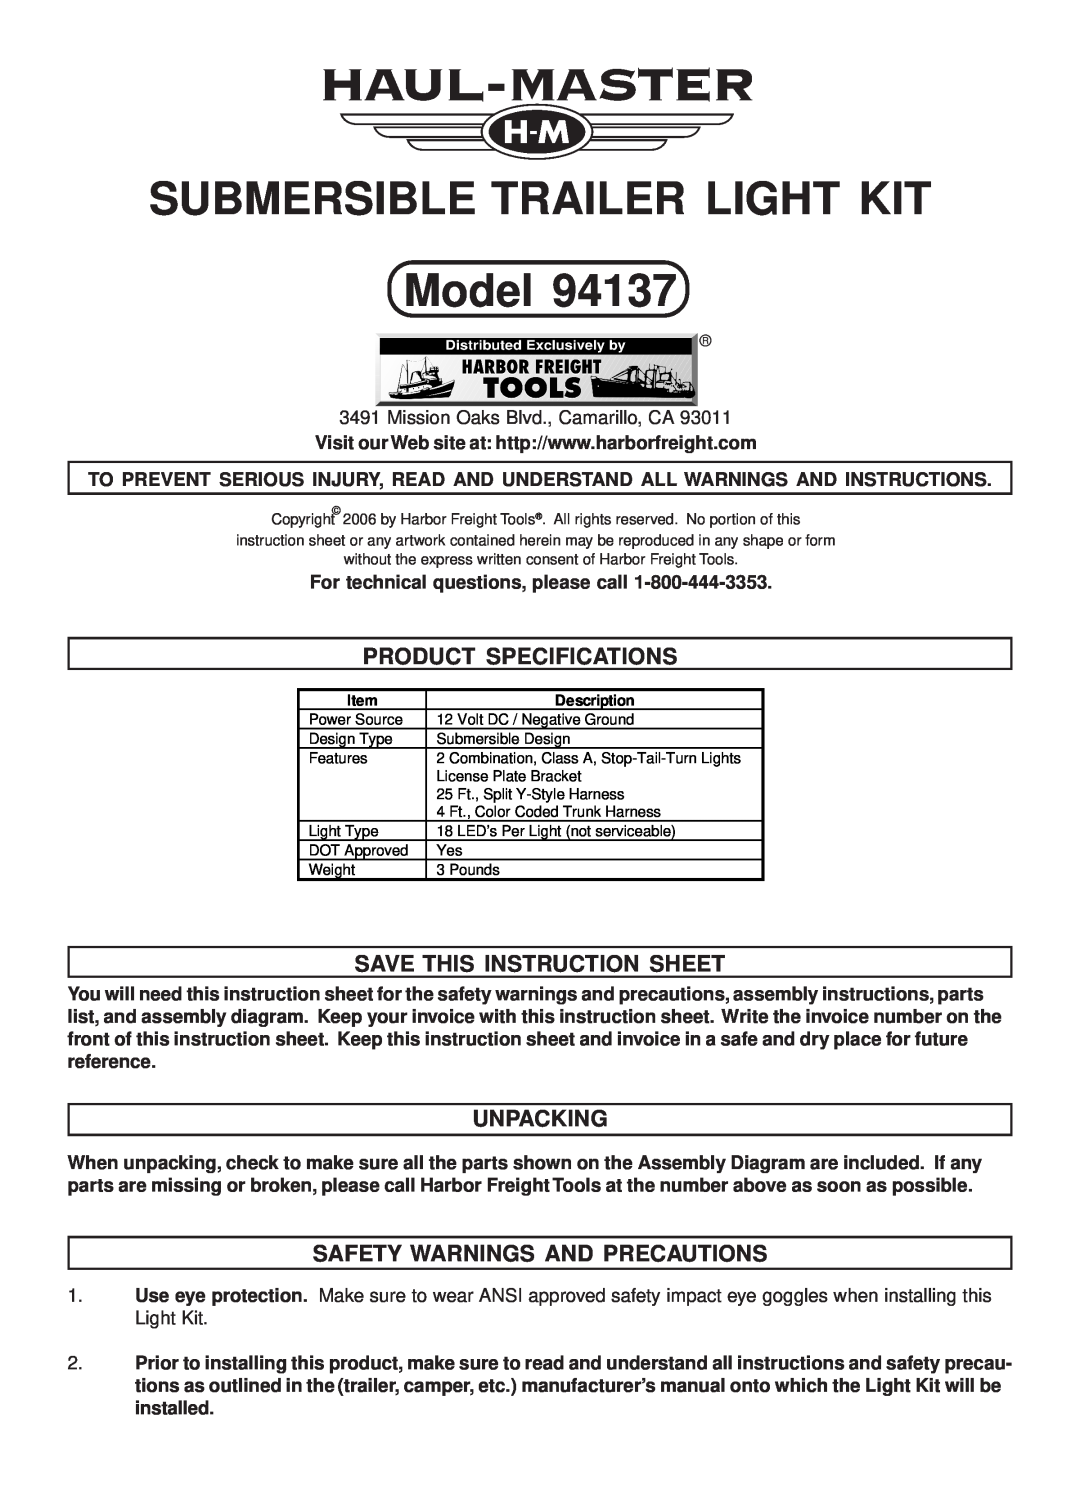 Harbor Freight Tools 94137 specifications Product Specifications, Save This Instruction Sheet, Unpacking 